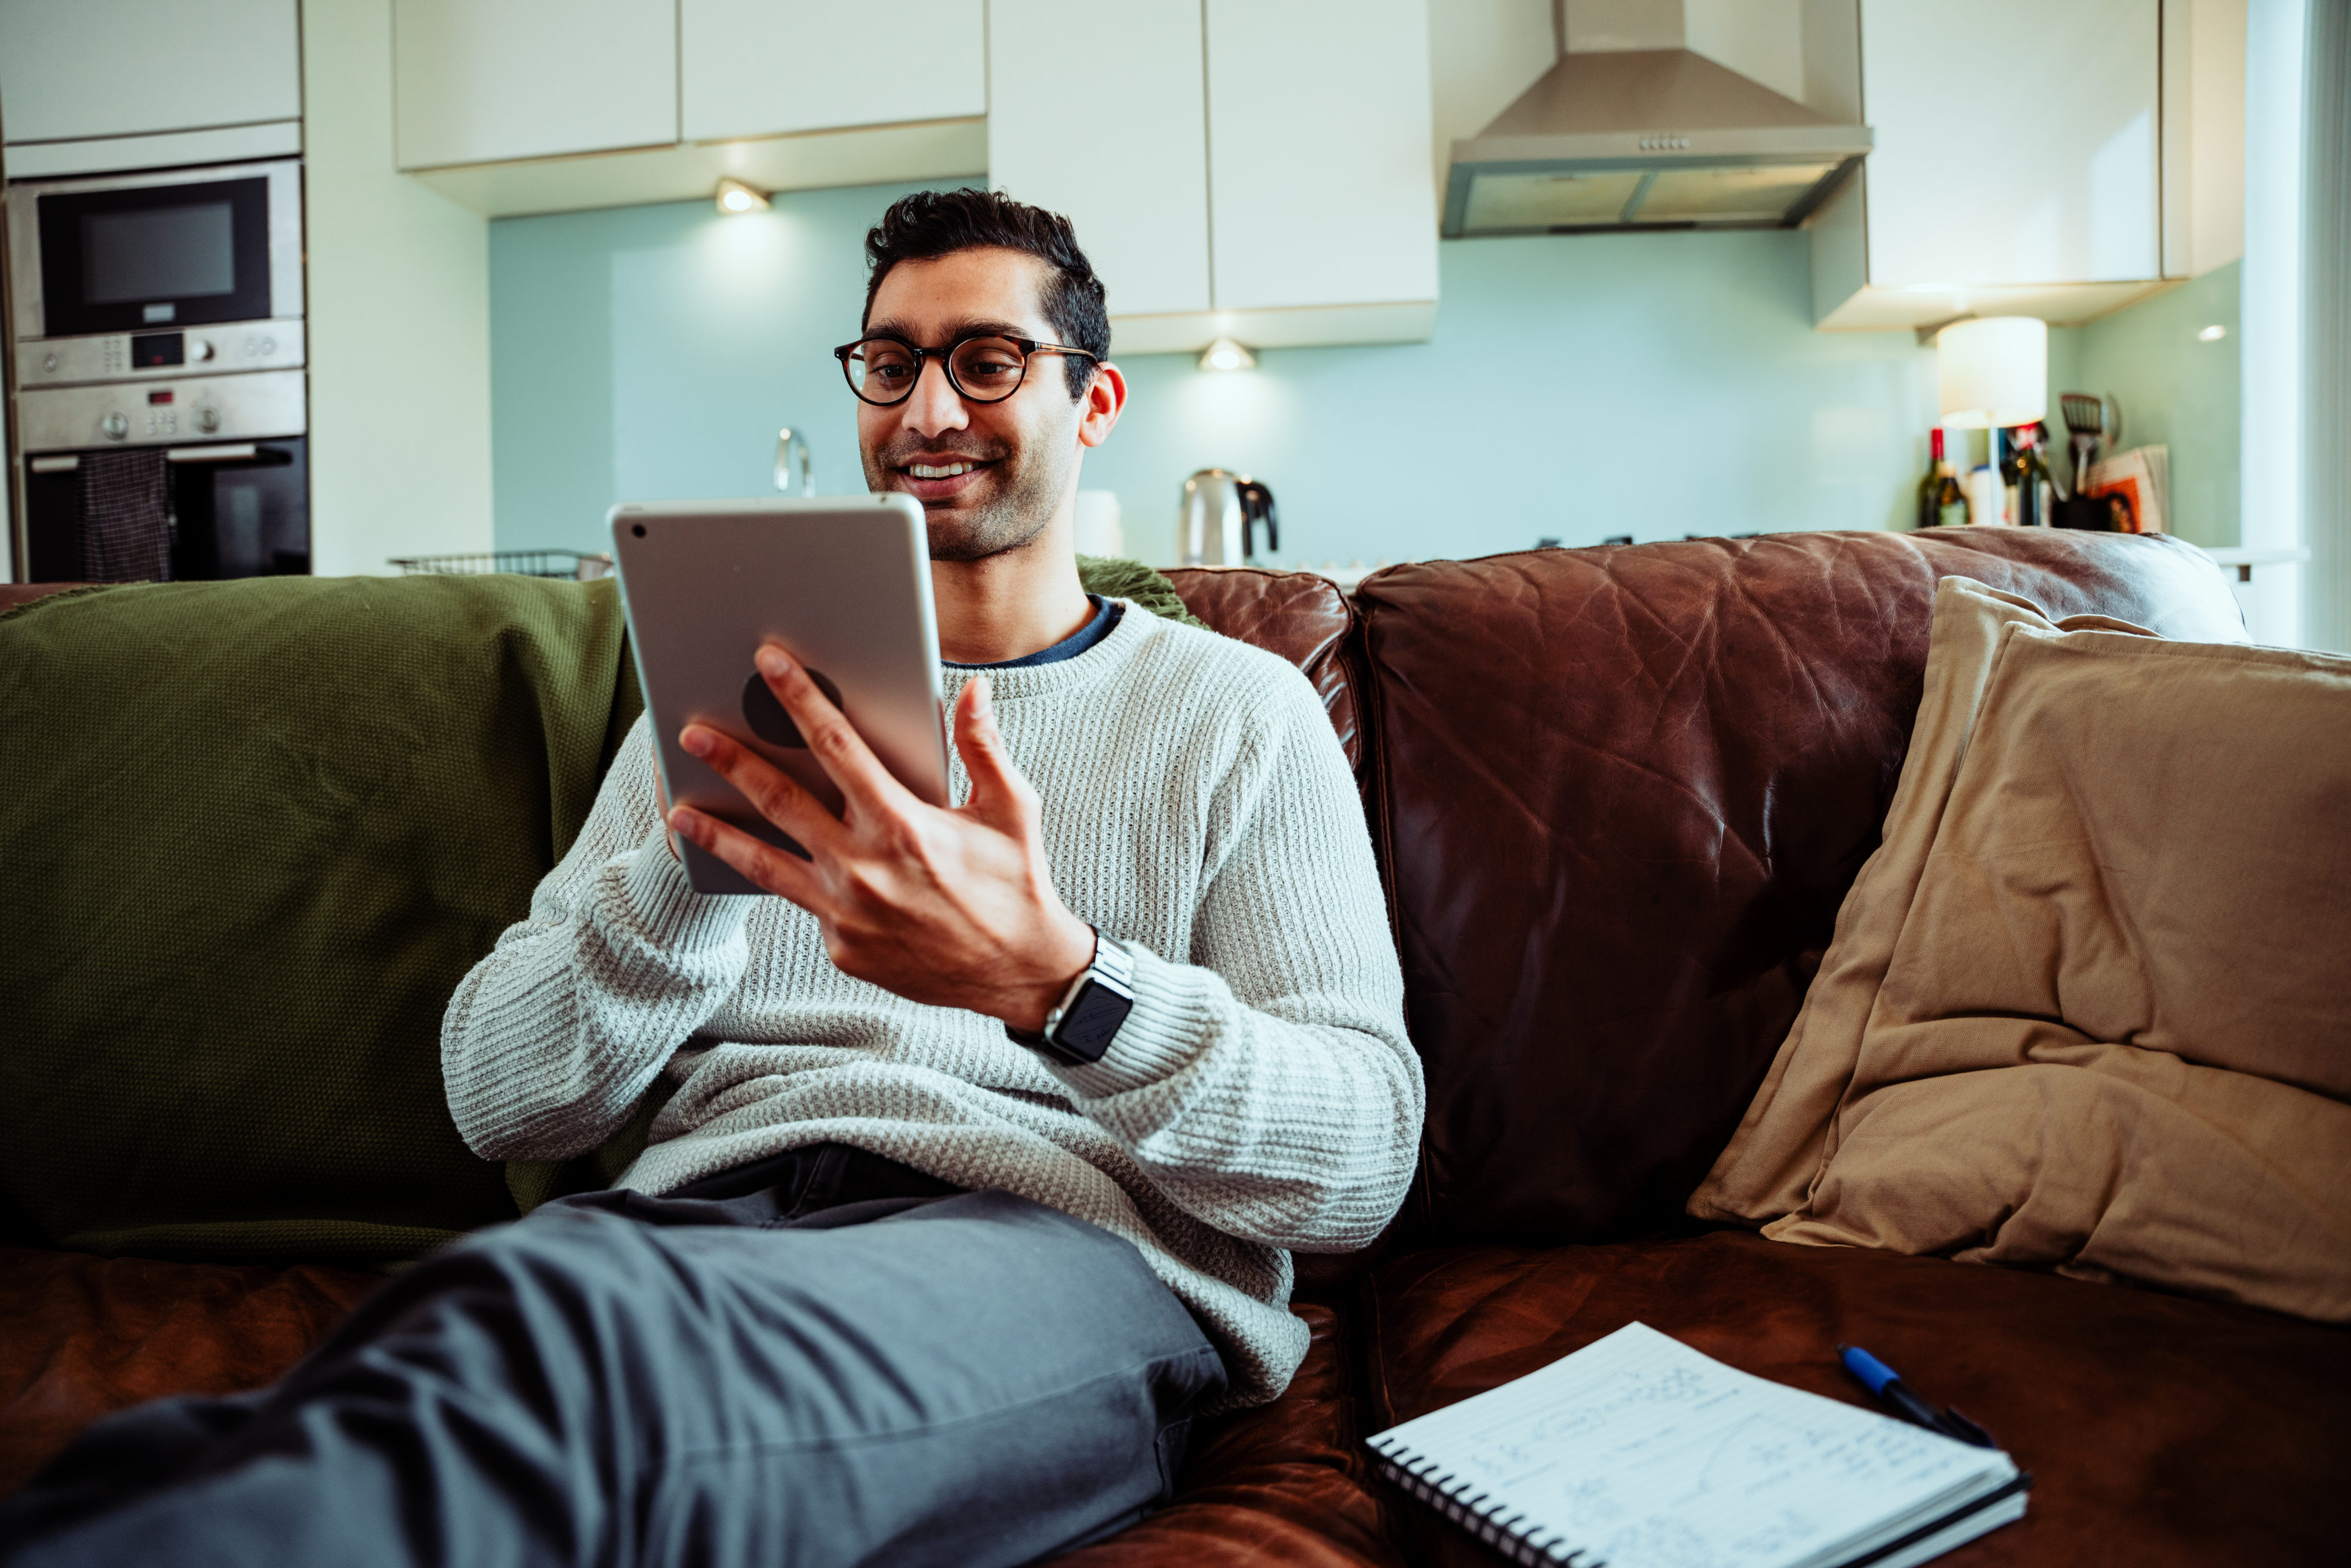 Man sitting on couch using his tablet